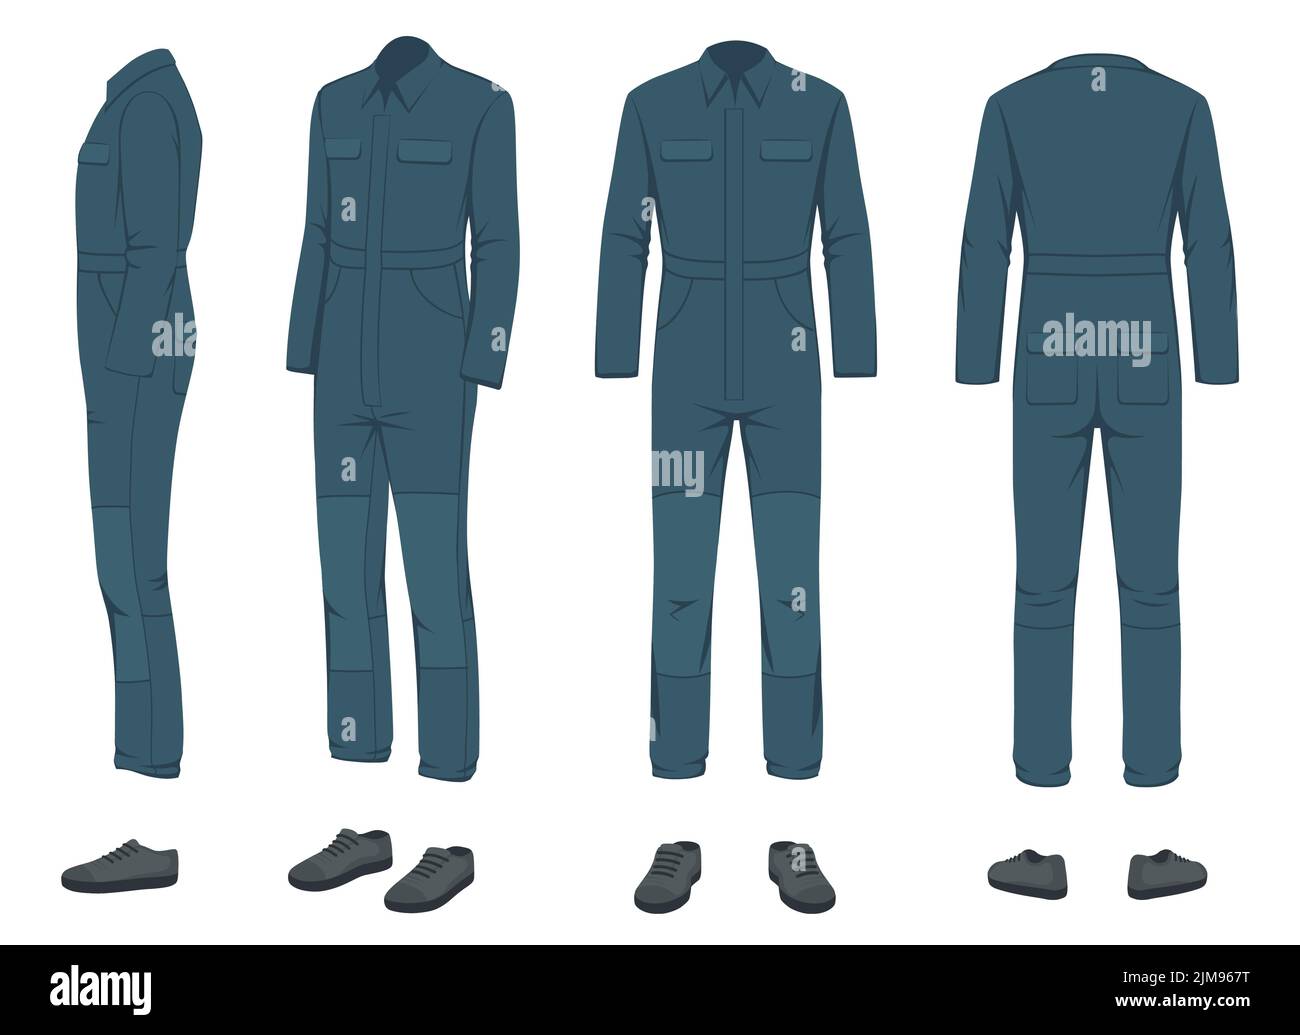 Worker Uniform Mockup Front View on white background, Uniform for a worker, mechanic, driver, loader, mechanic. Stock Vector